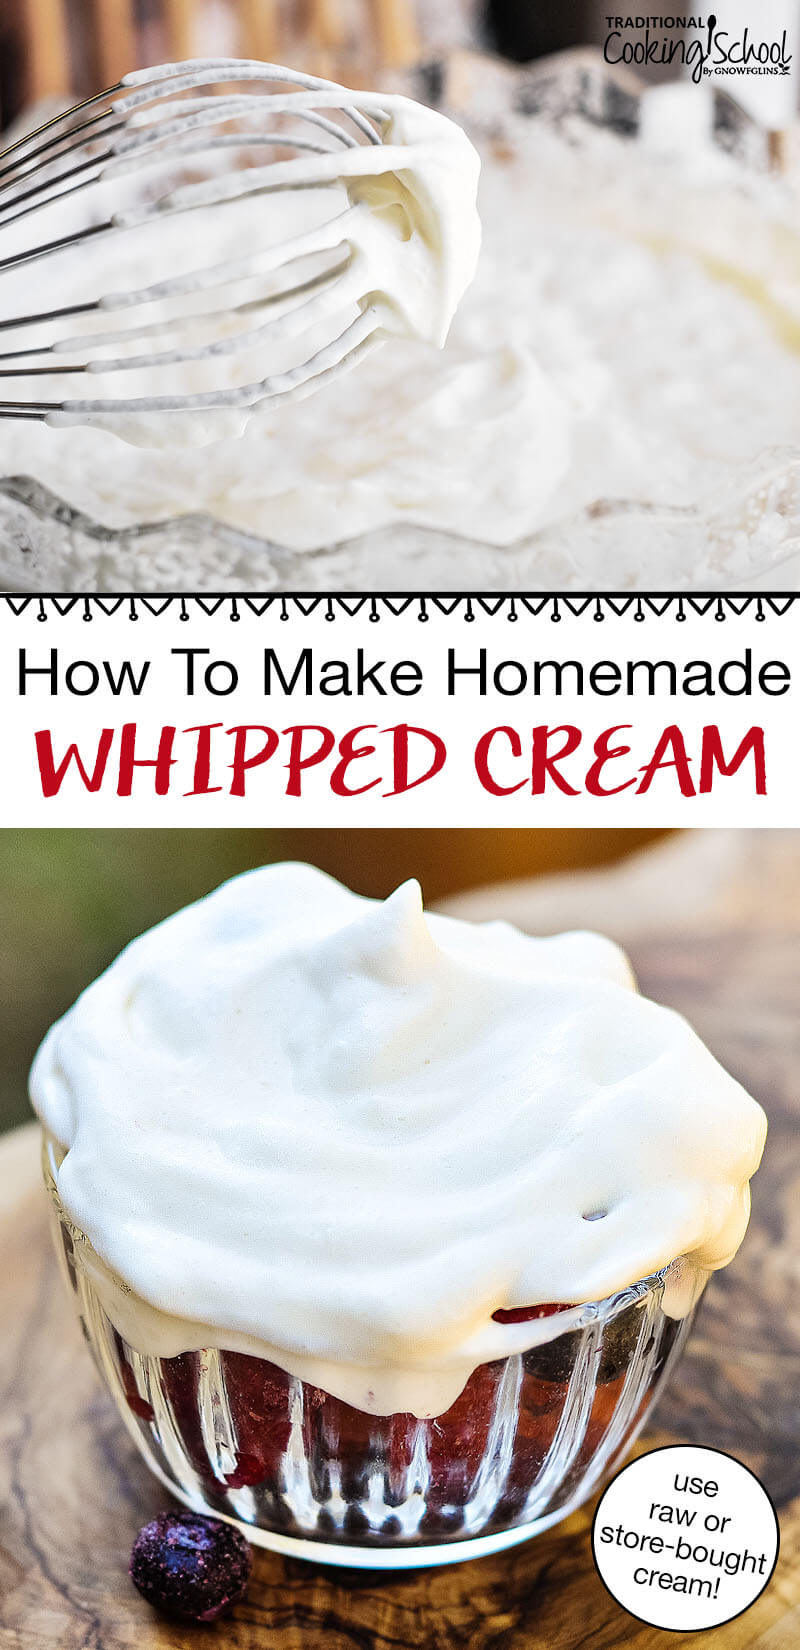 photo collage of making whipped cream, with text overlay: "How To Make Homemade Whipped Cream (use raw or store-bought milk!)"